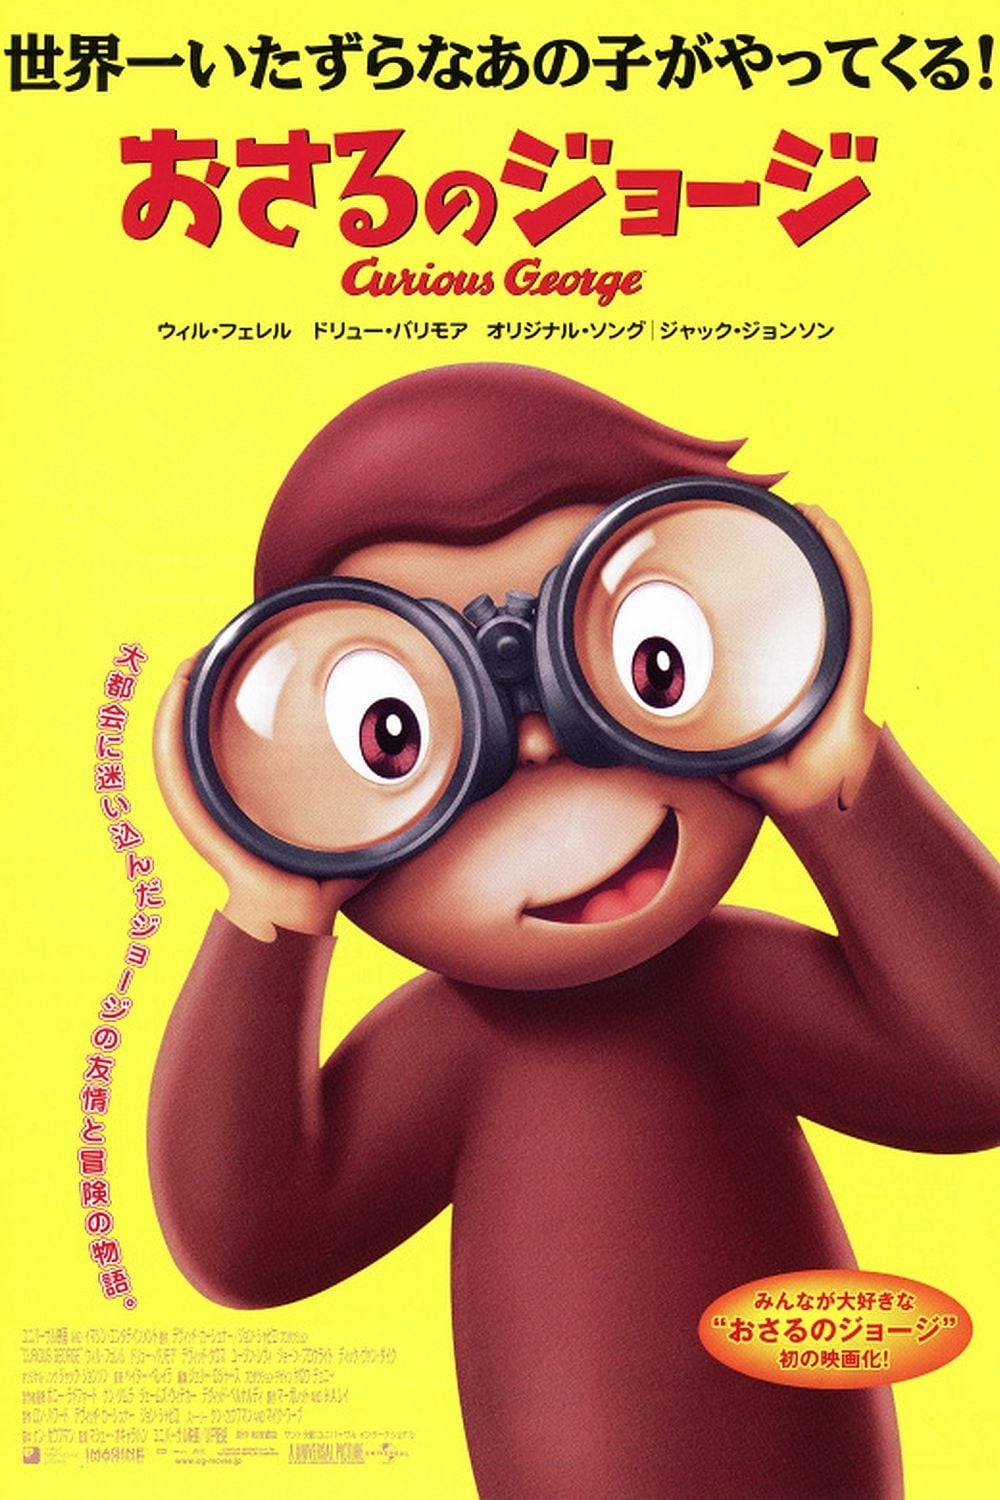 Watch and Download Curious George (2006) Full HD Movie Online Free